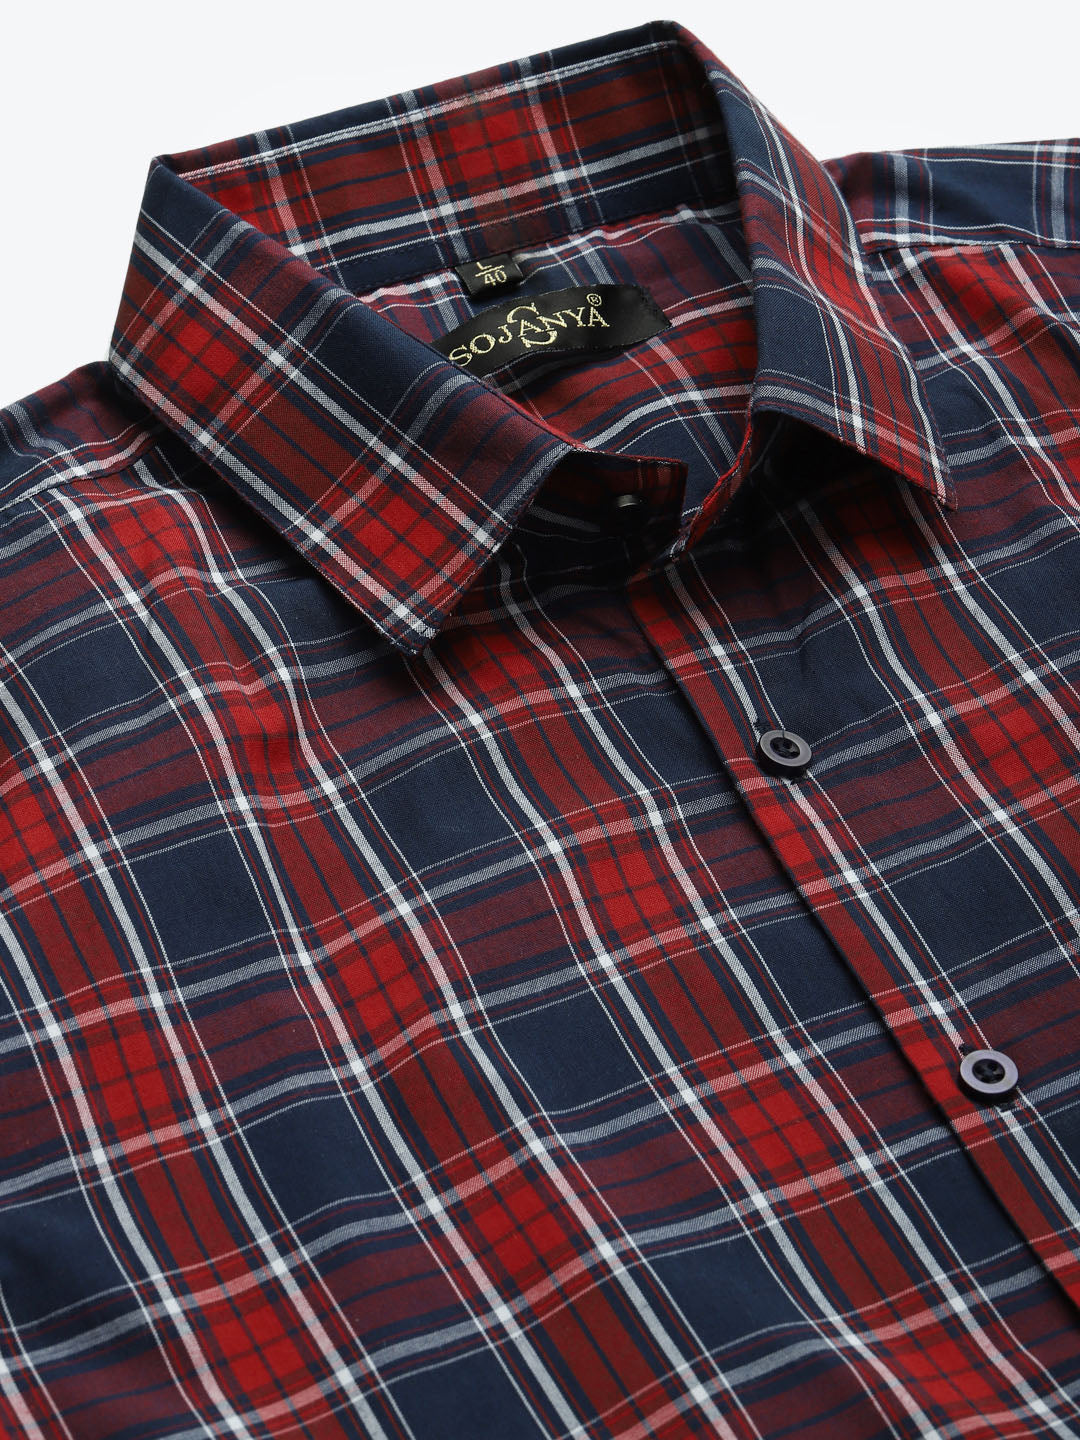 Men's Cotton Red & Navy Half sleeves Casual Shirt